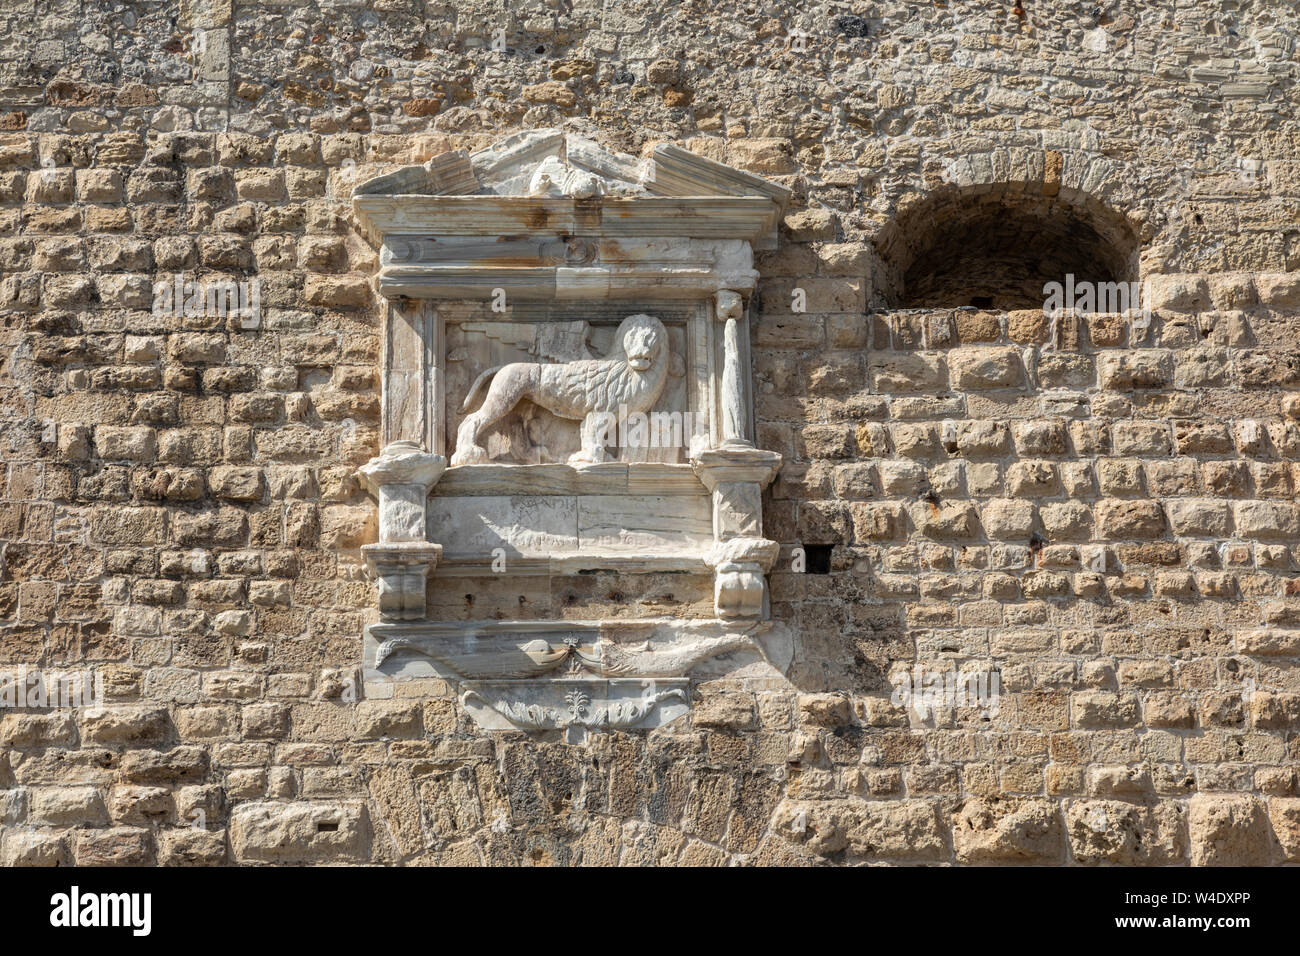 The winged lion of Saint Mark - The Fortress of Koules in Heraklion, Crete, Greece Stock Photo